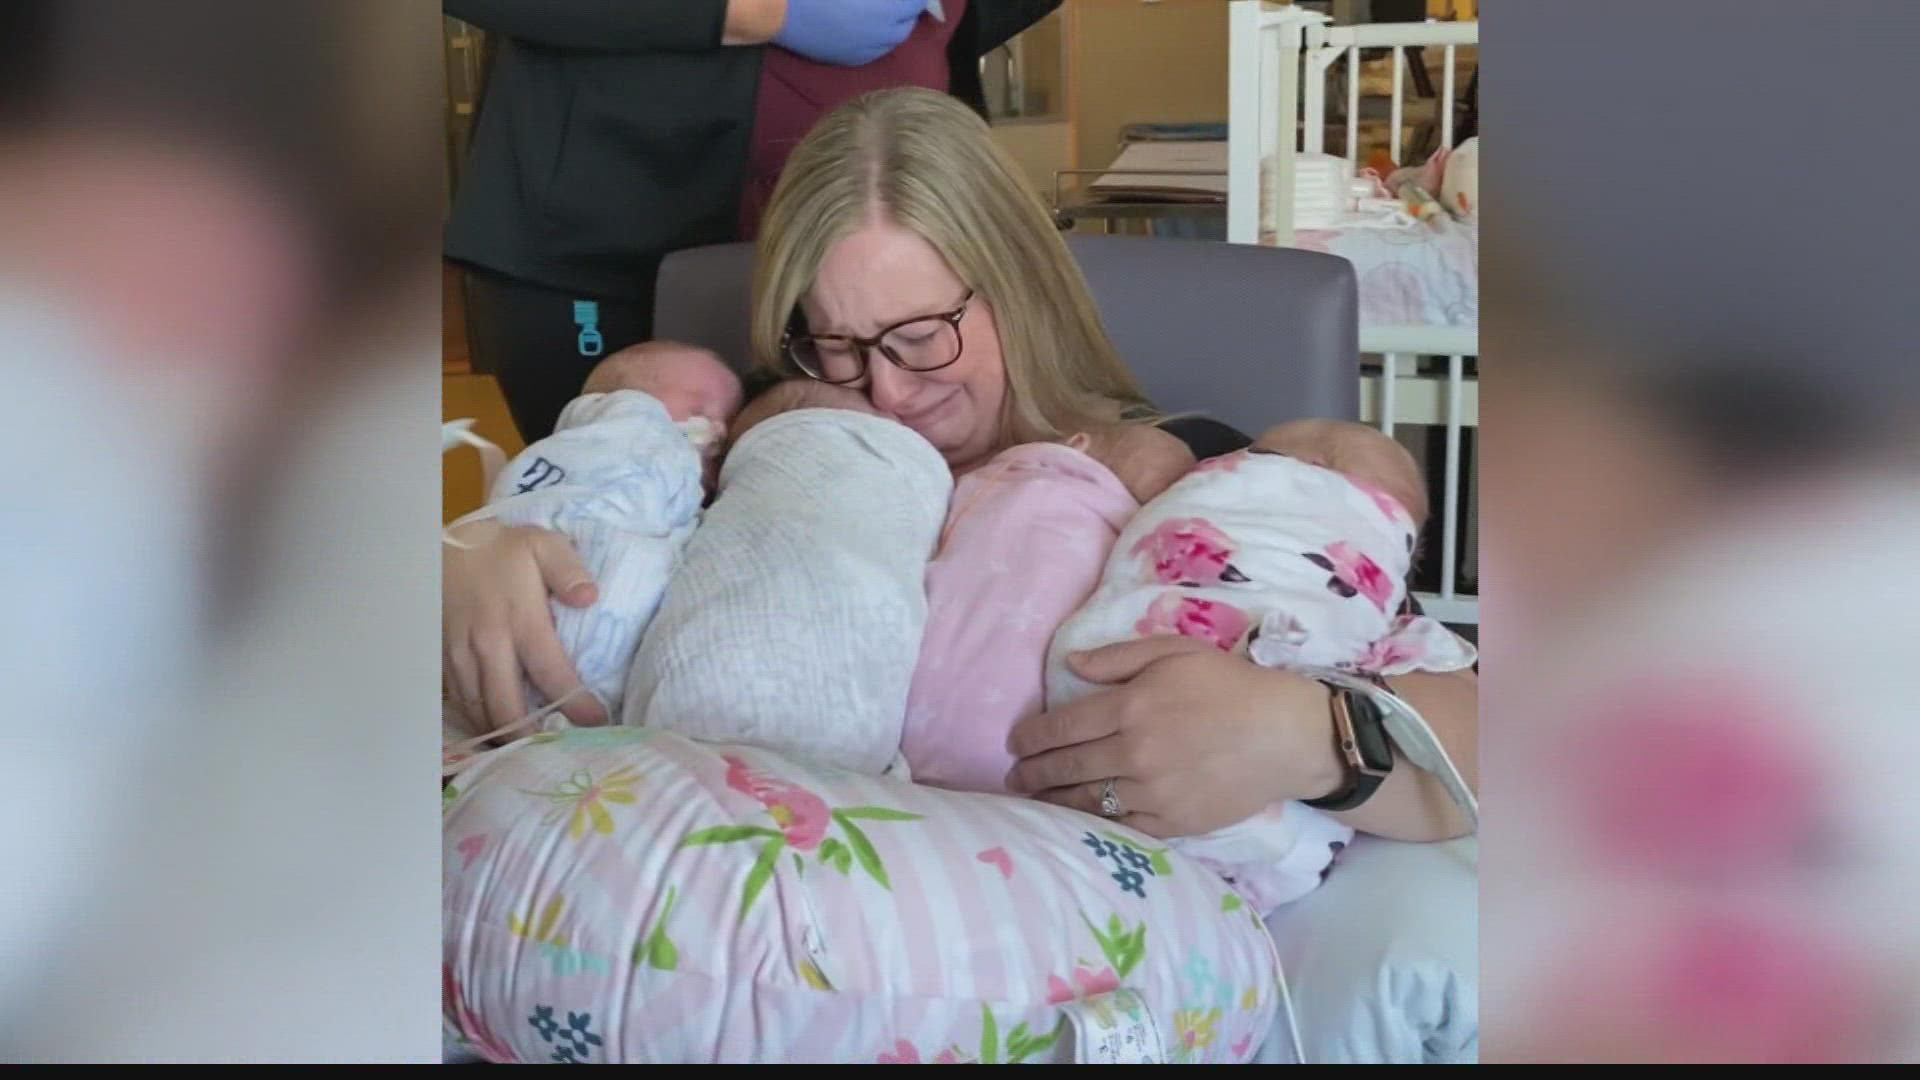 After years of infertility issues the couple feels “blessed” to have four more babies.